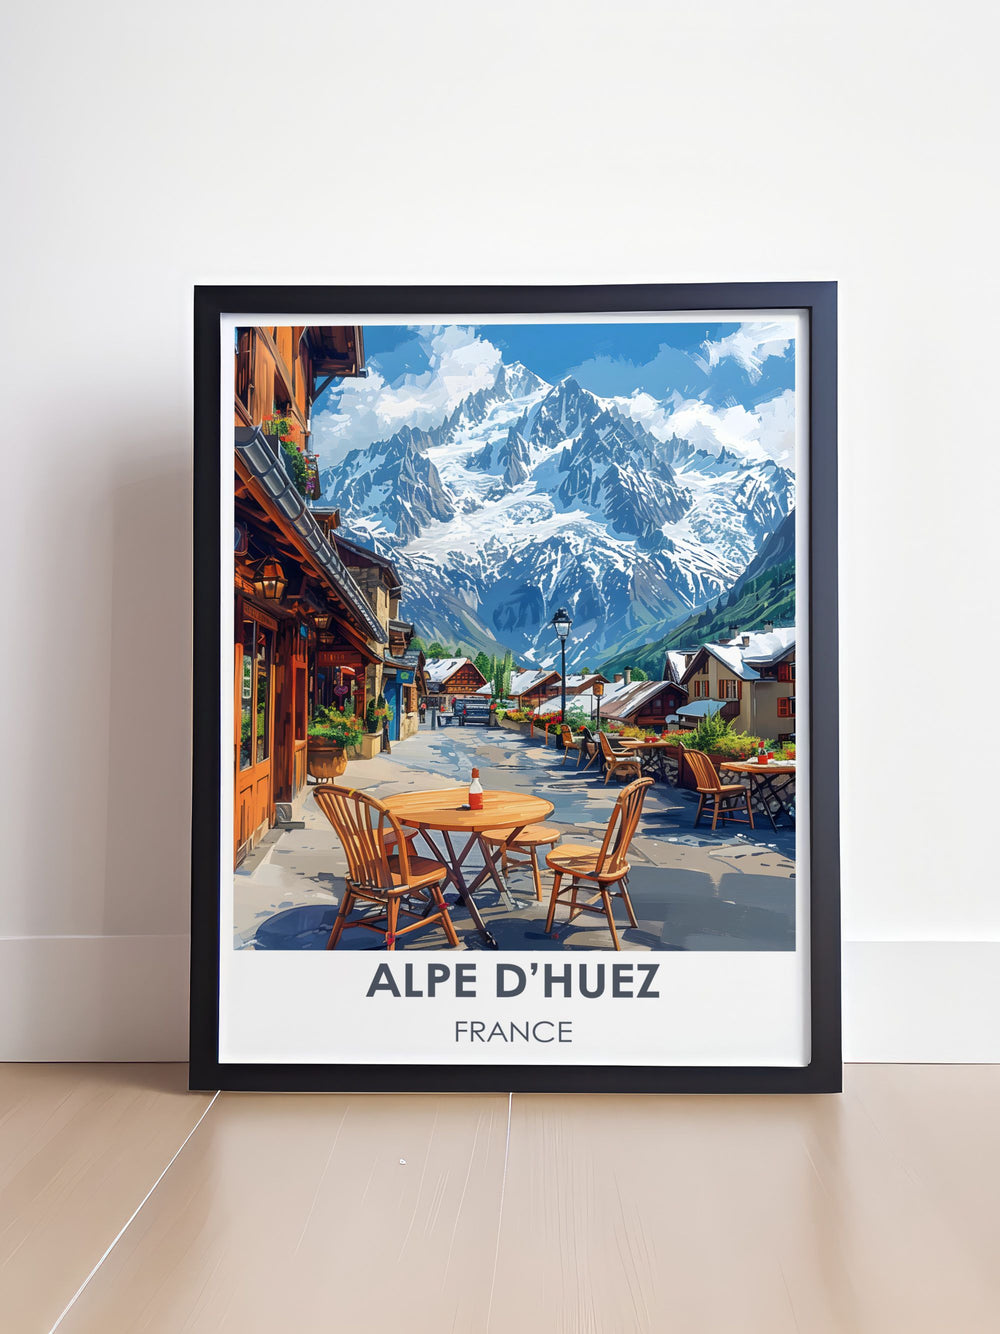 Vintage poster of LAlpe dHuez showcasing skiers and picturesque mountain views, perfect for lovers of retro ski art.